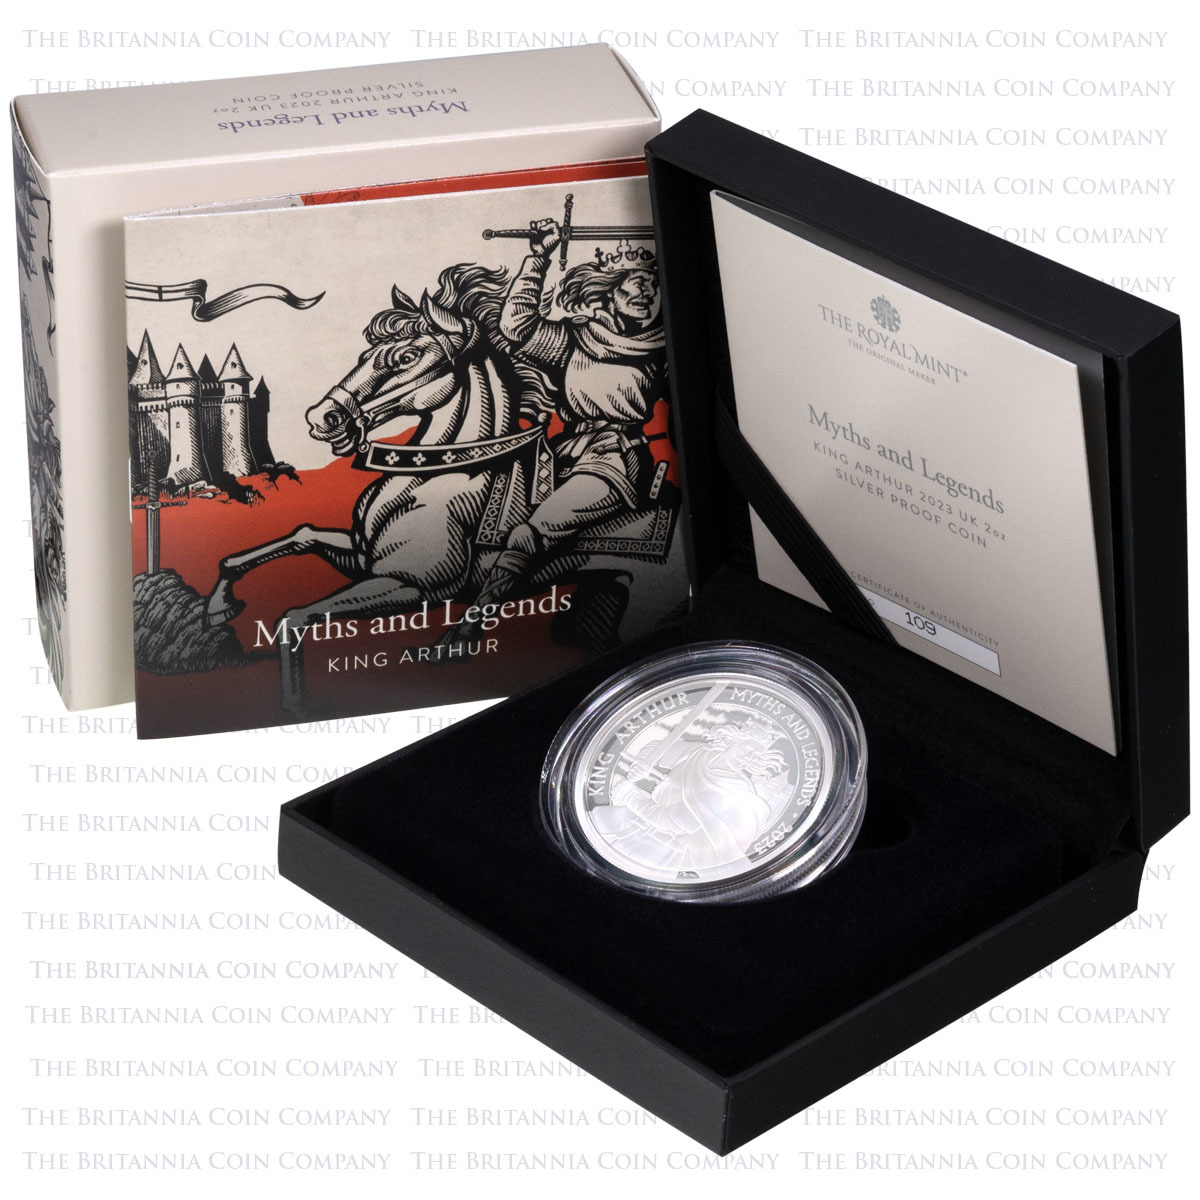 UK23KAS2 2023 Myths And Legends King Arthur Two Ounce Silver Proof Coin Boxed